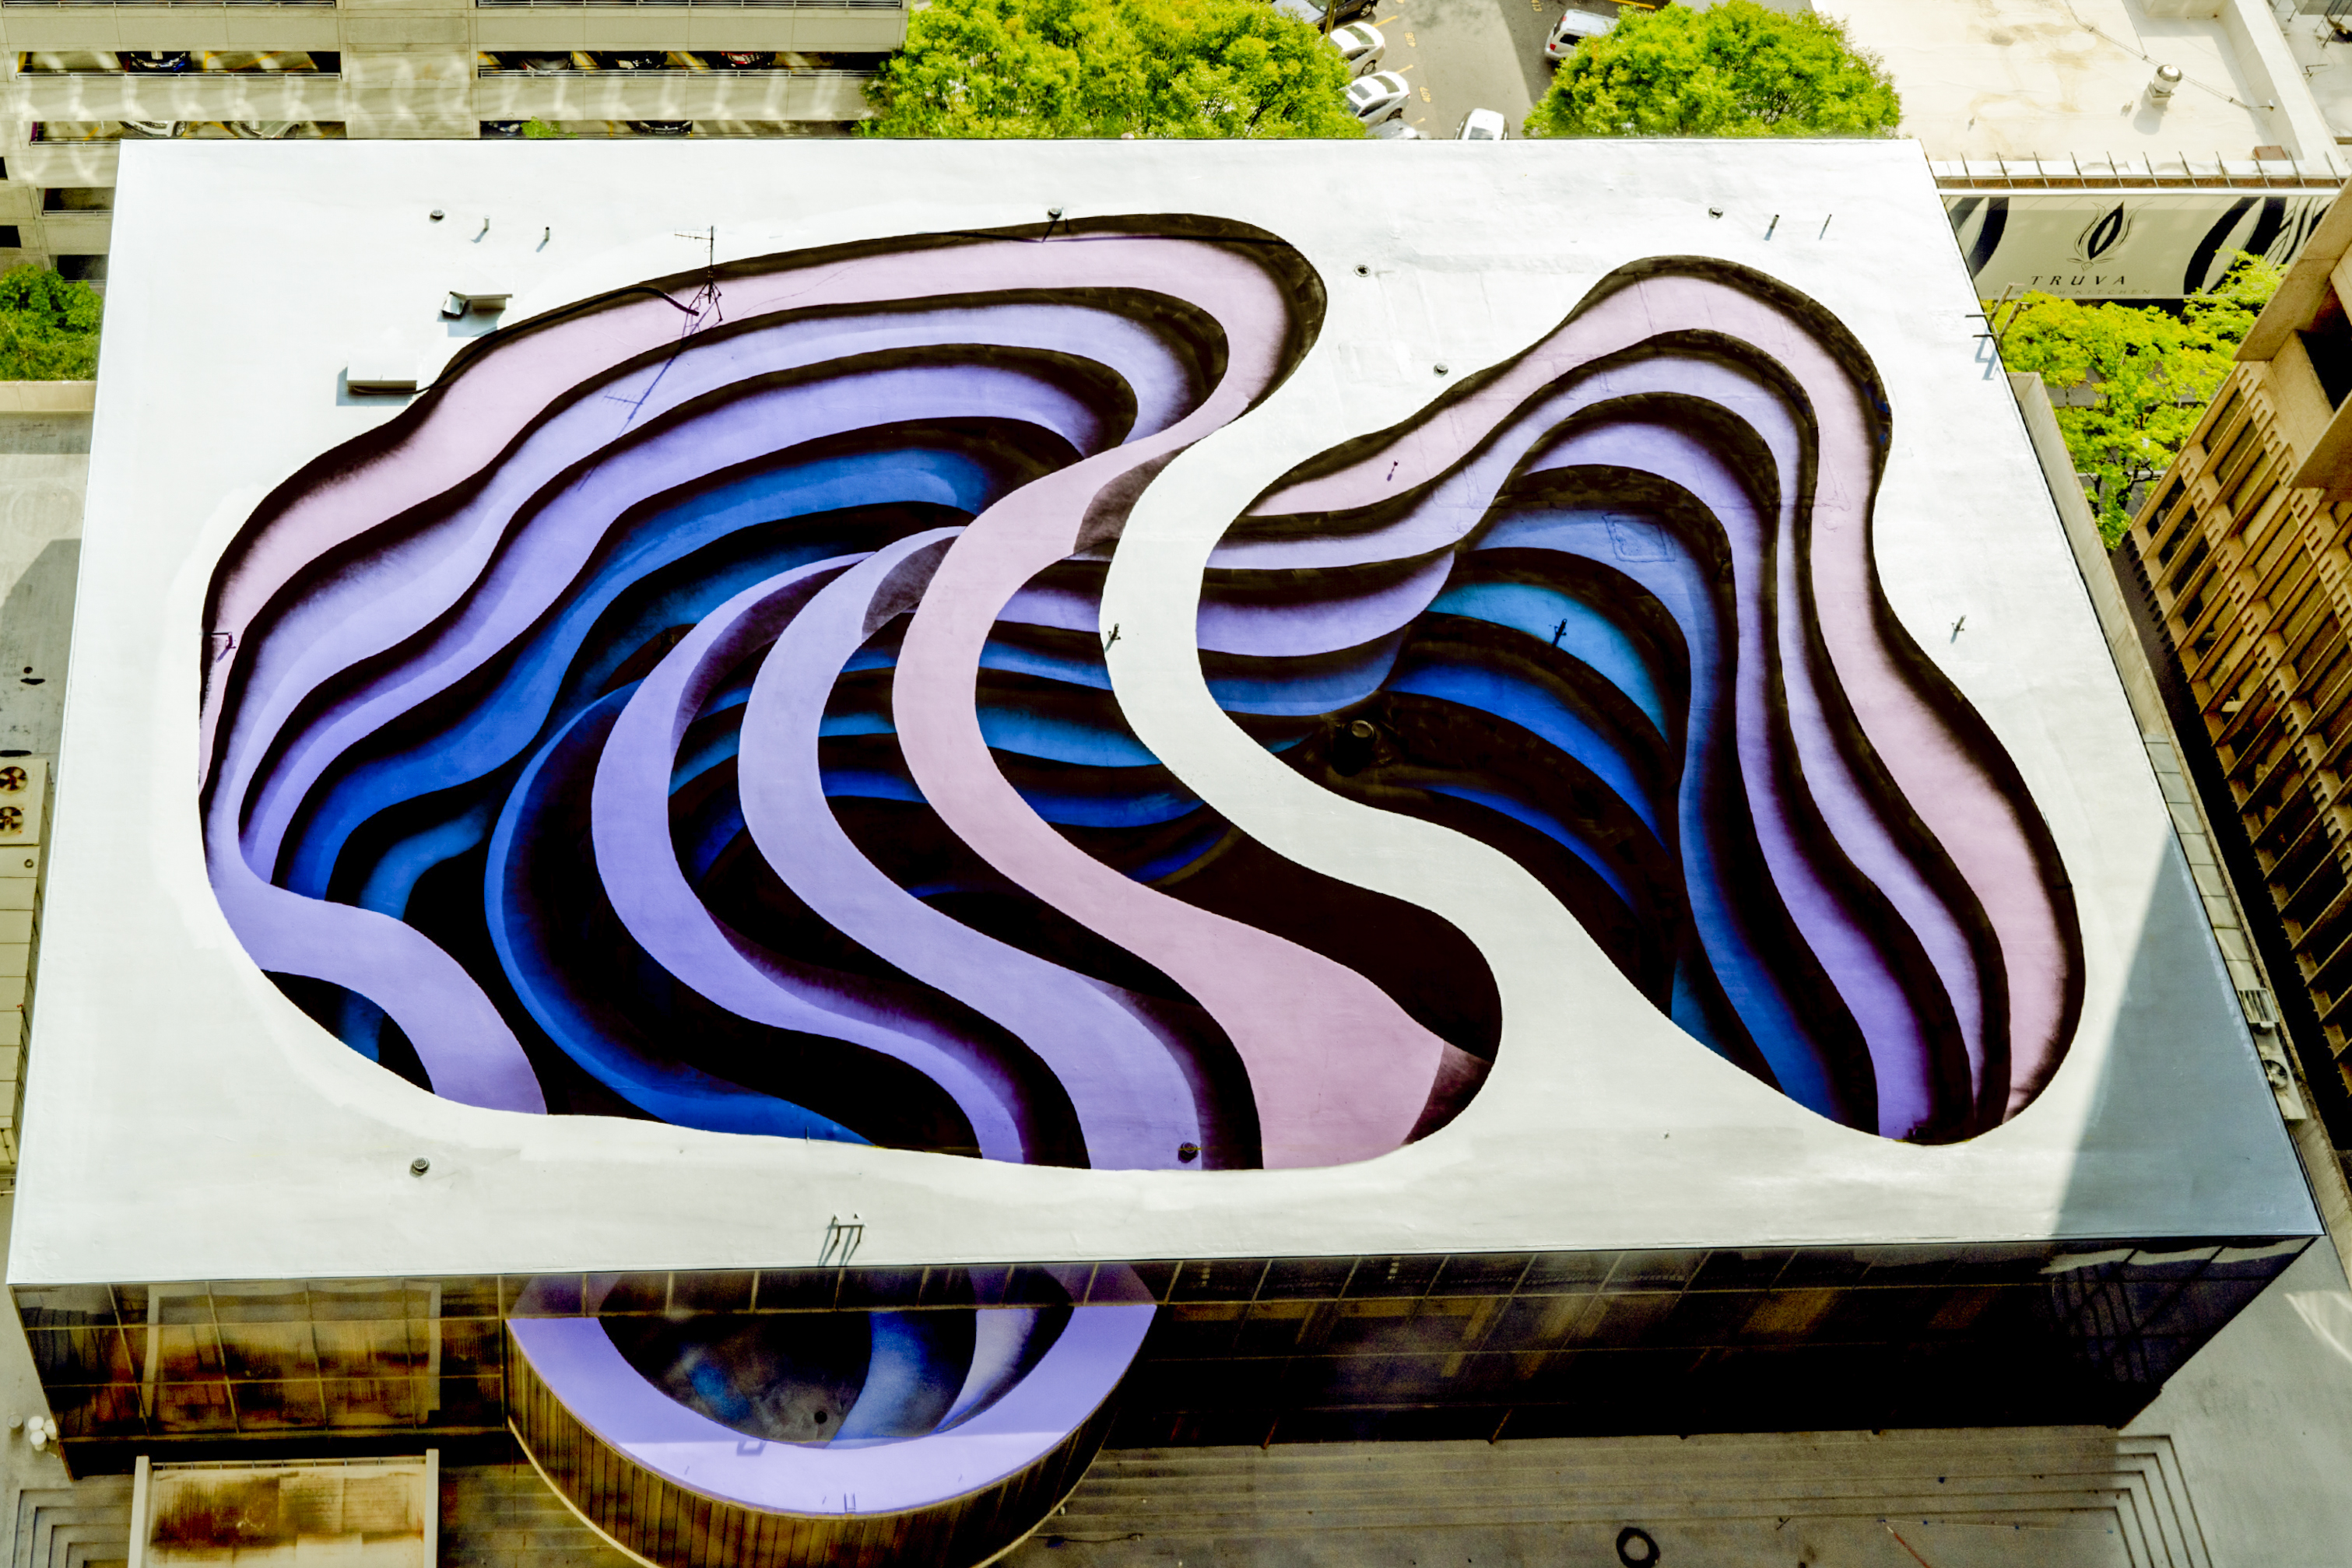 mural “Paradigm Shift” by 1010 at Peachtree Center